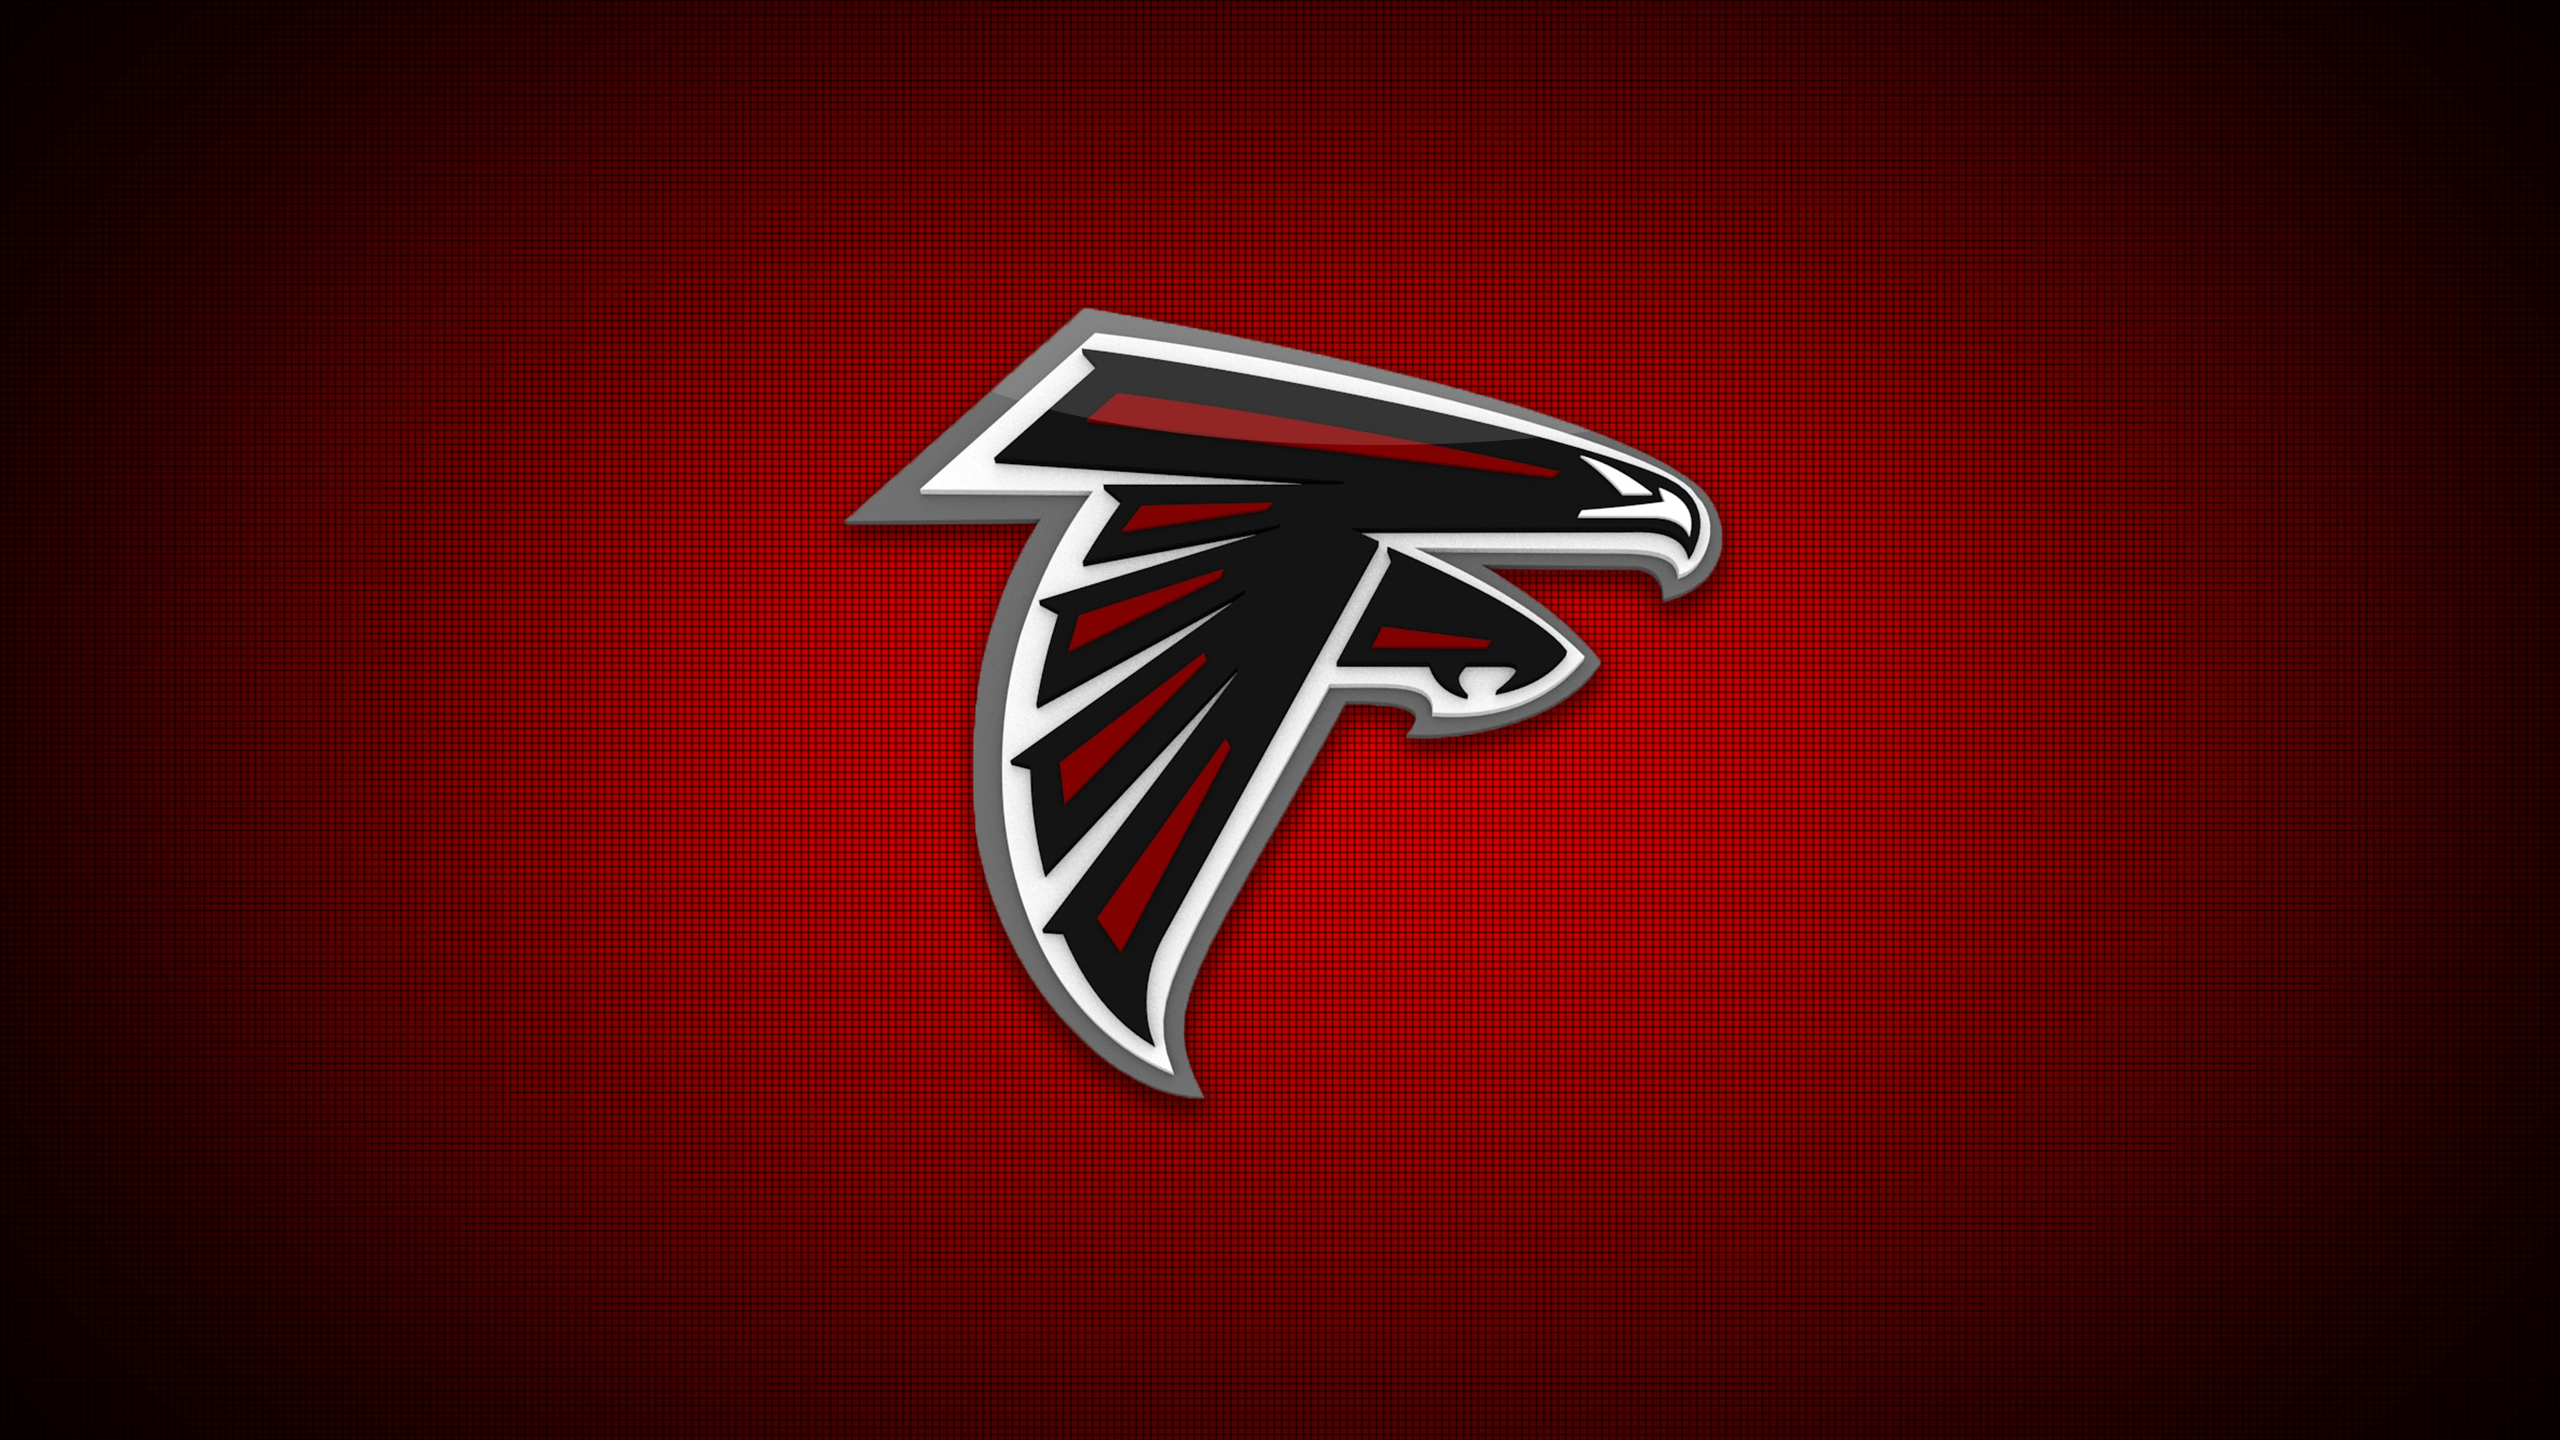 General 2560x1440 falcons logo red background minimalism red American football digital art simple background